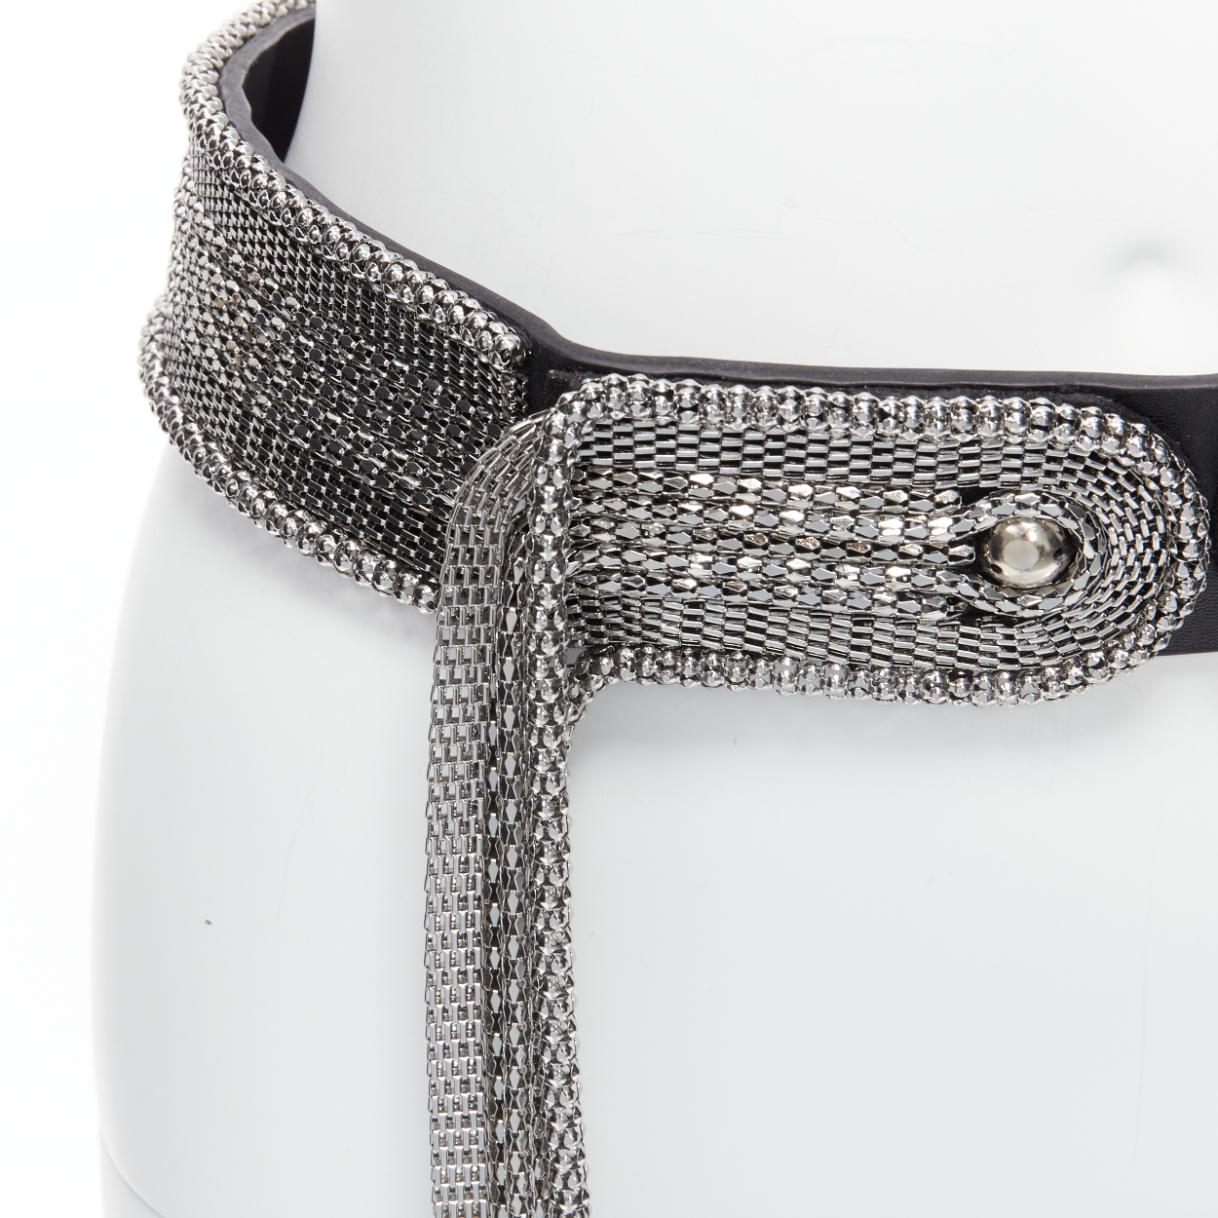 CHRISTOPHER KANE 2023 silver dangling chain black leather statement waist belt S
Reference: AAWC/A00501
Brand: Christopher Kane
Collection: 2023
Material: Metal, Leather
Color: Silver, Black
Pattern: Solid
Closure: Snap Buttons
Extra Details: